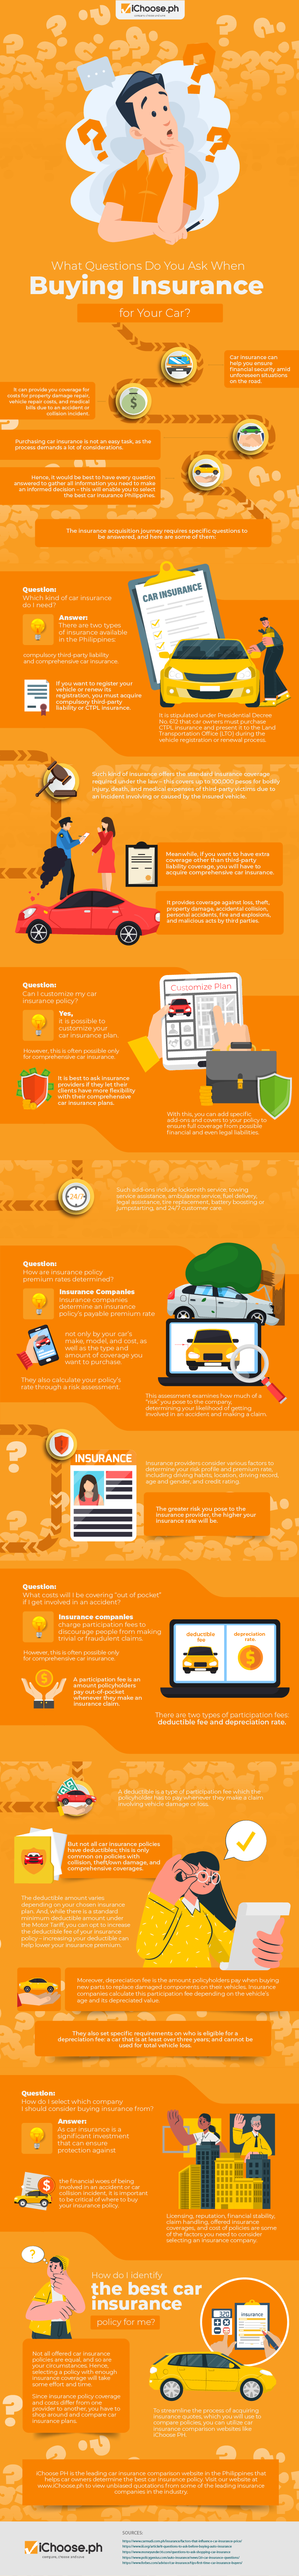 What-Questions-Do-You-Ask-When-Buying-Insurance-for-Your-Car-Philippines-Infographic